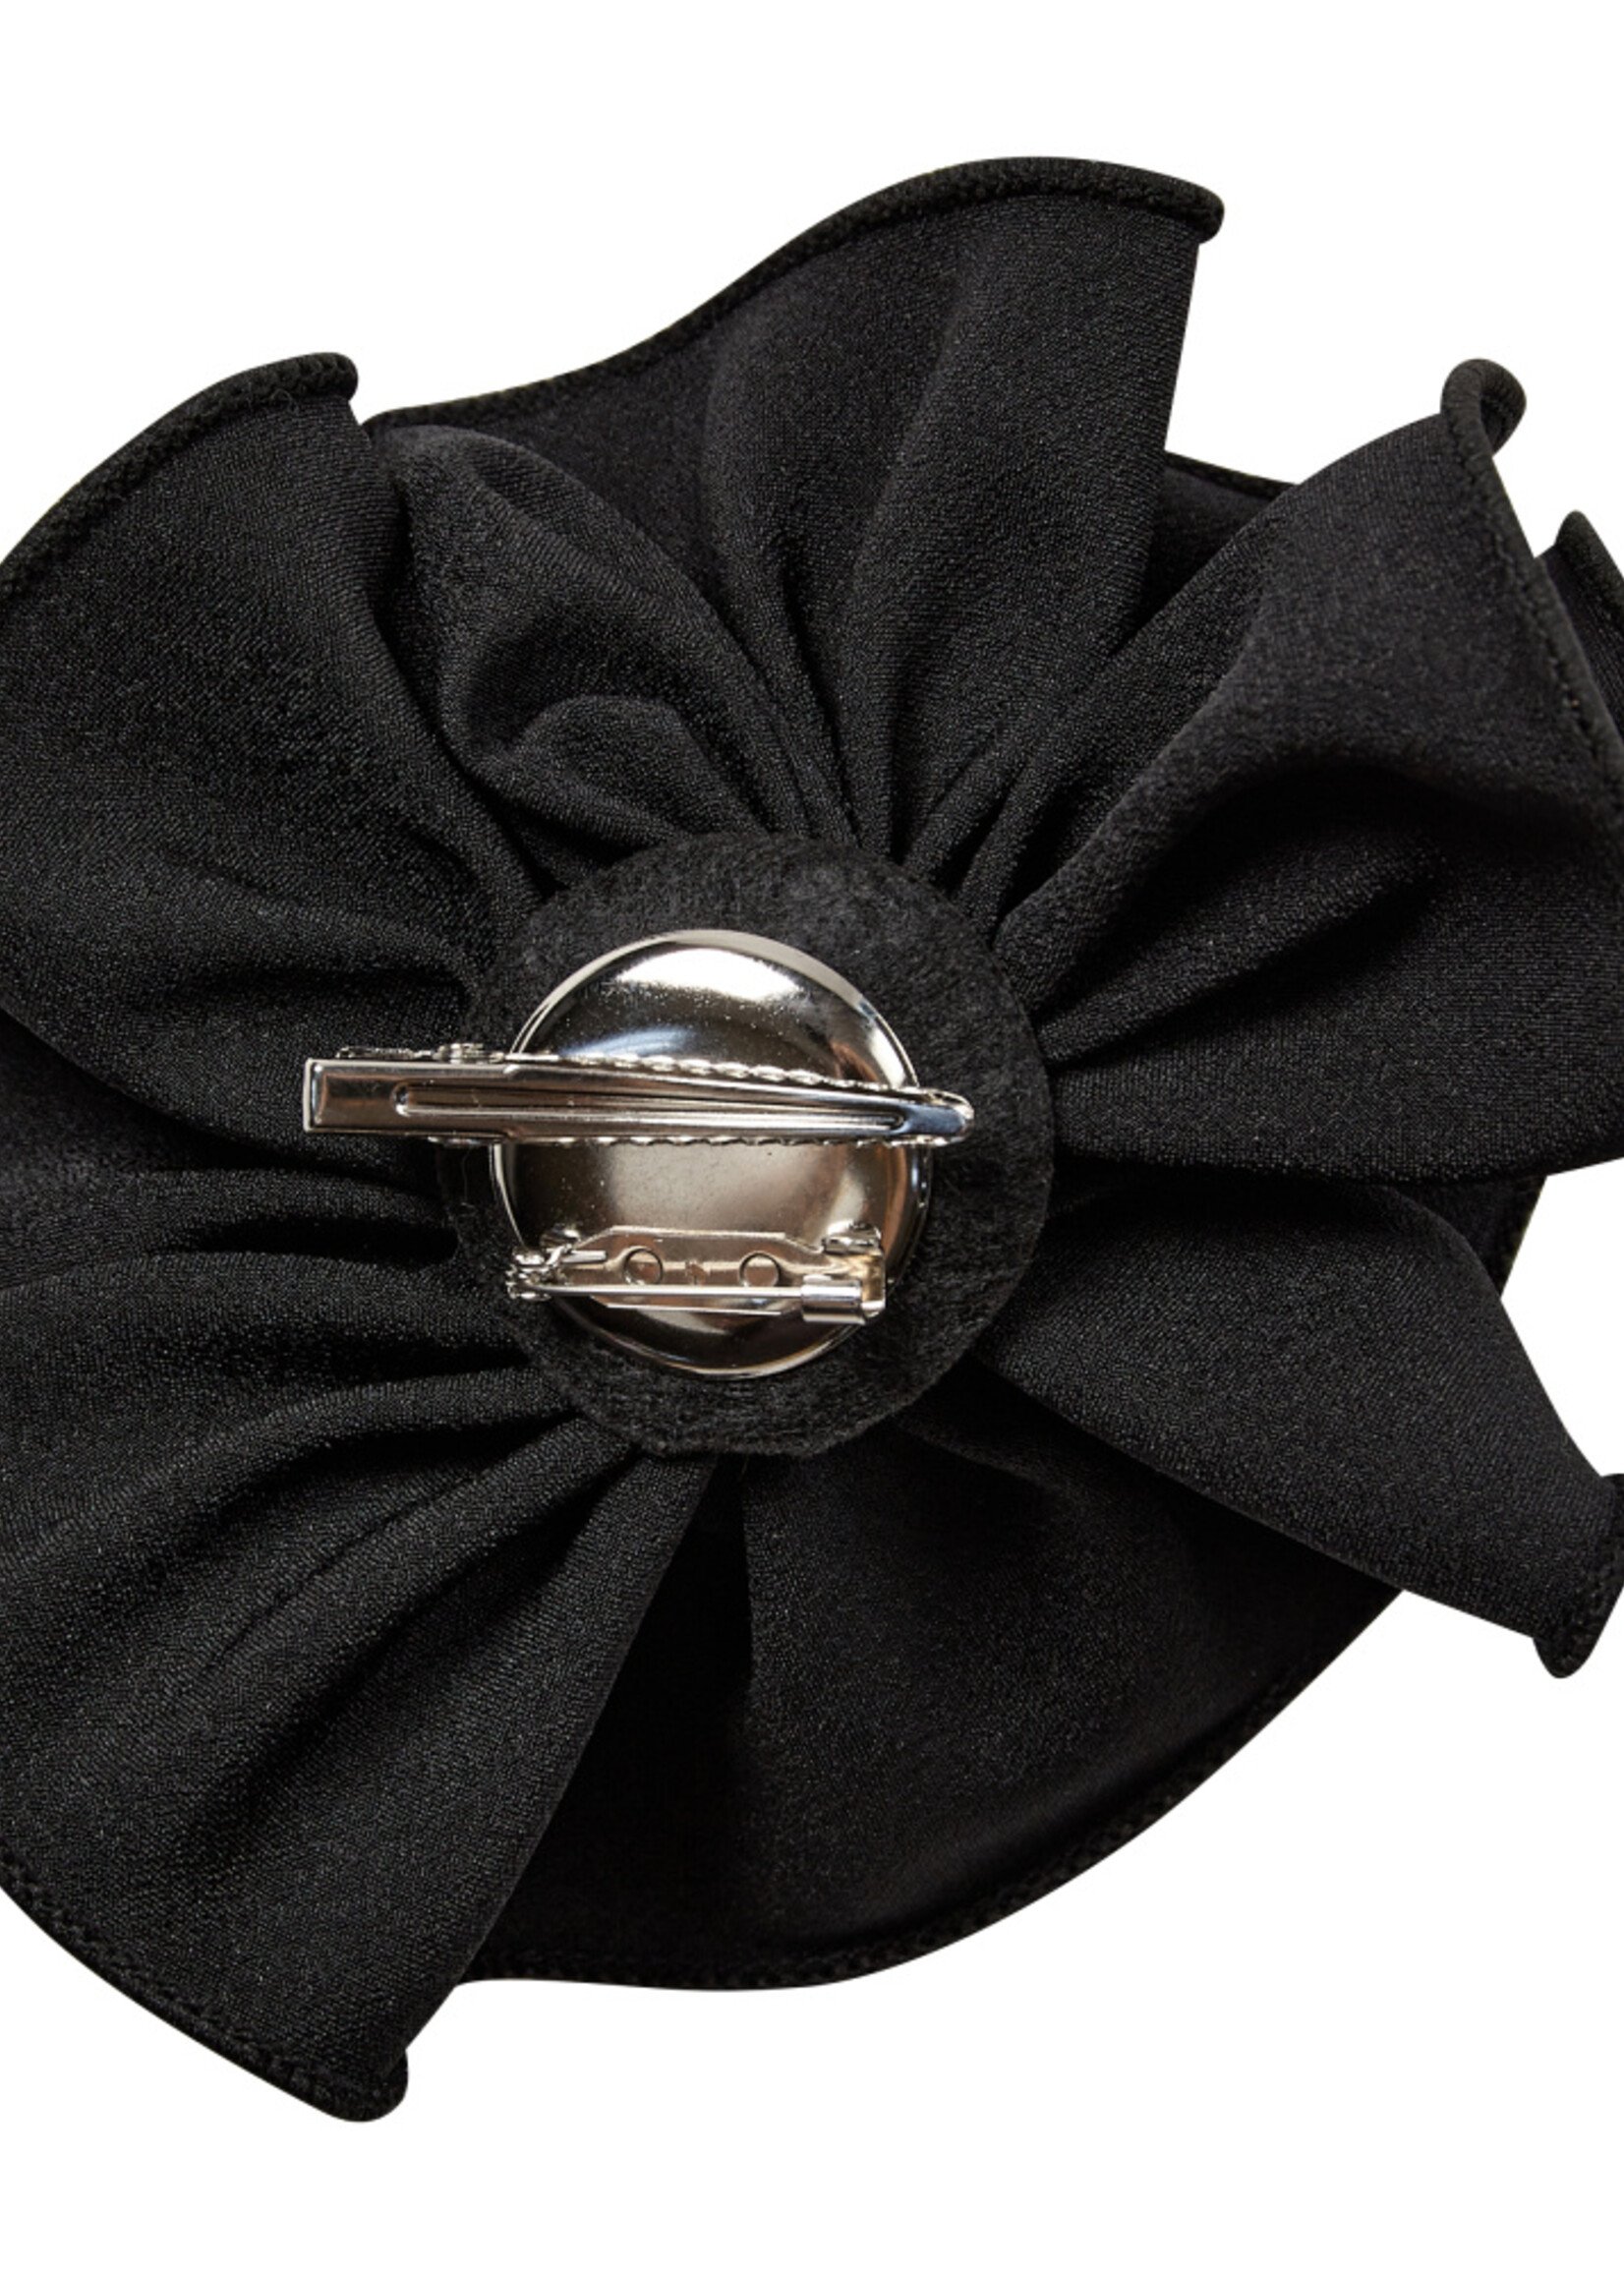 Co'Couture RosettaCC Rose Pin - Black